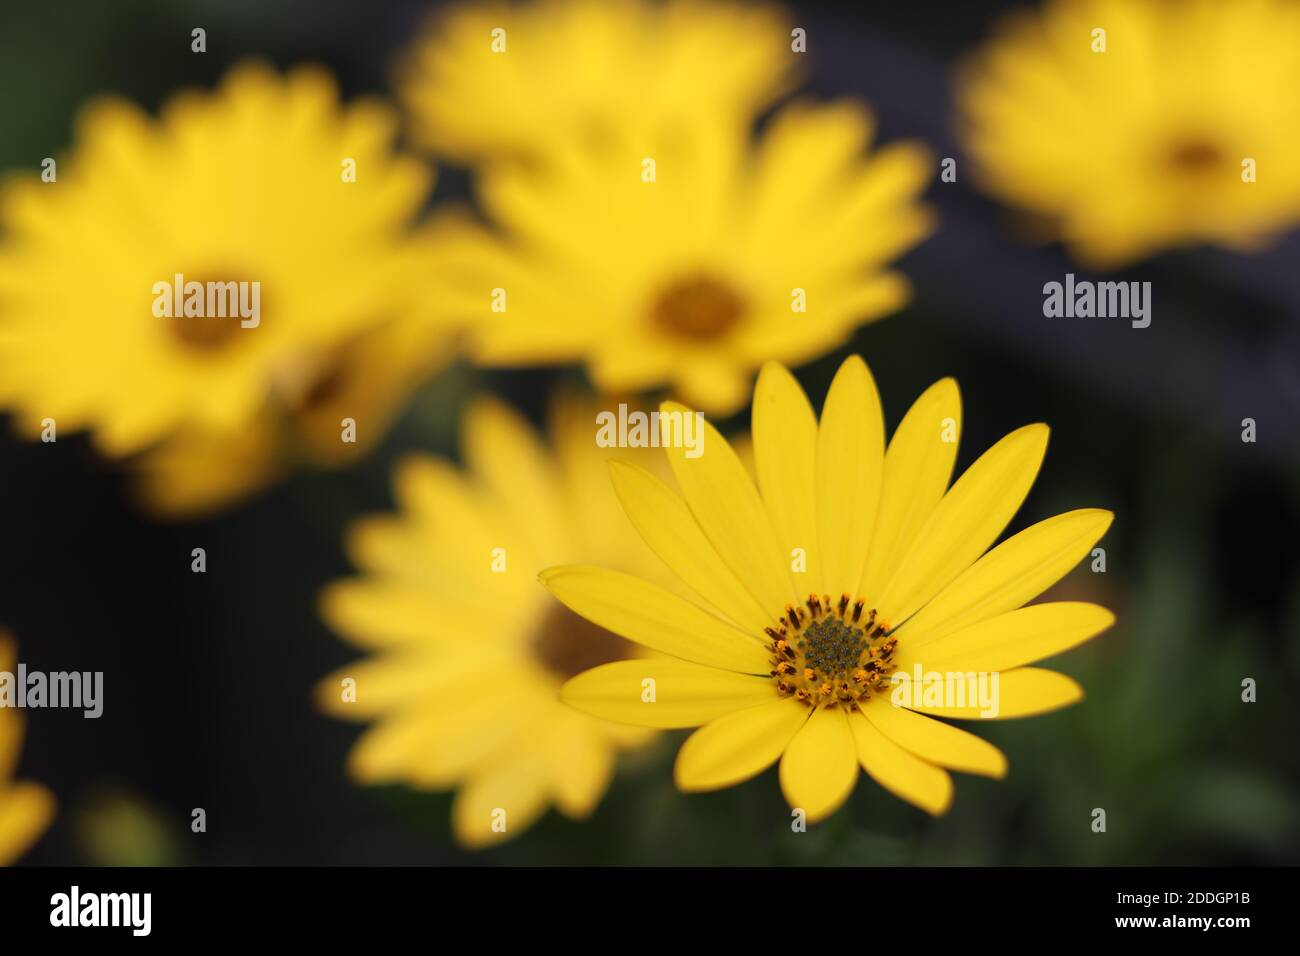 Closeup view of yellow aster and blurred background with asters Stock Photo